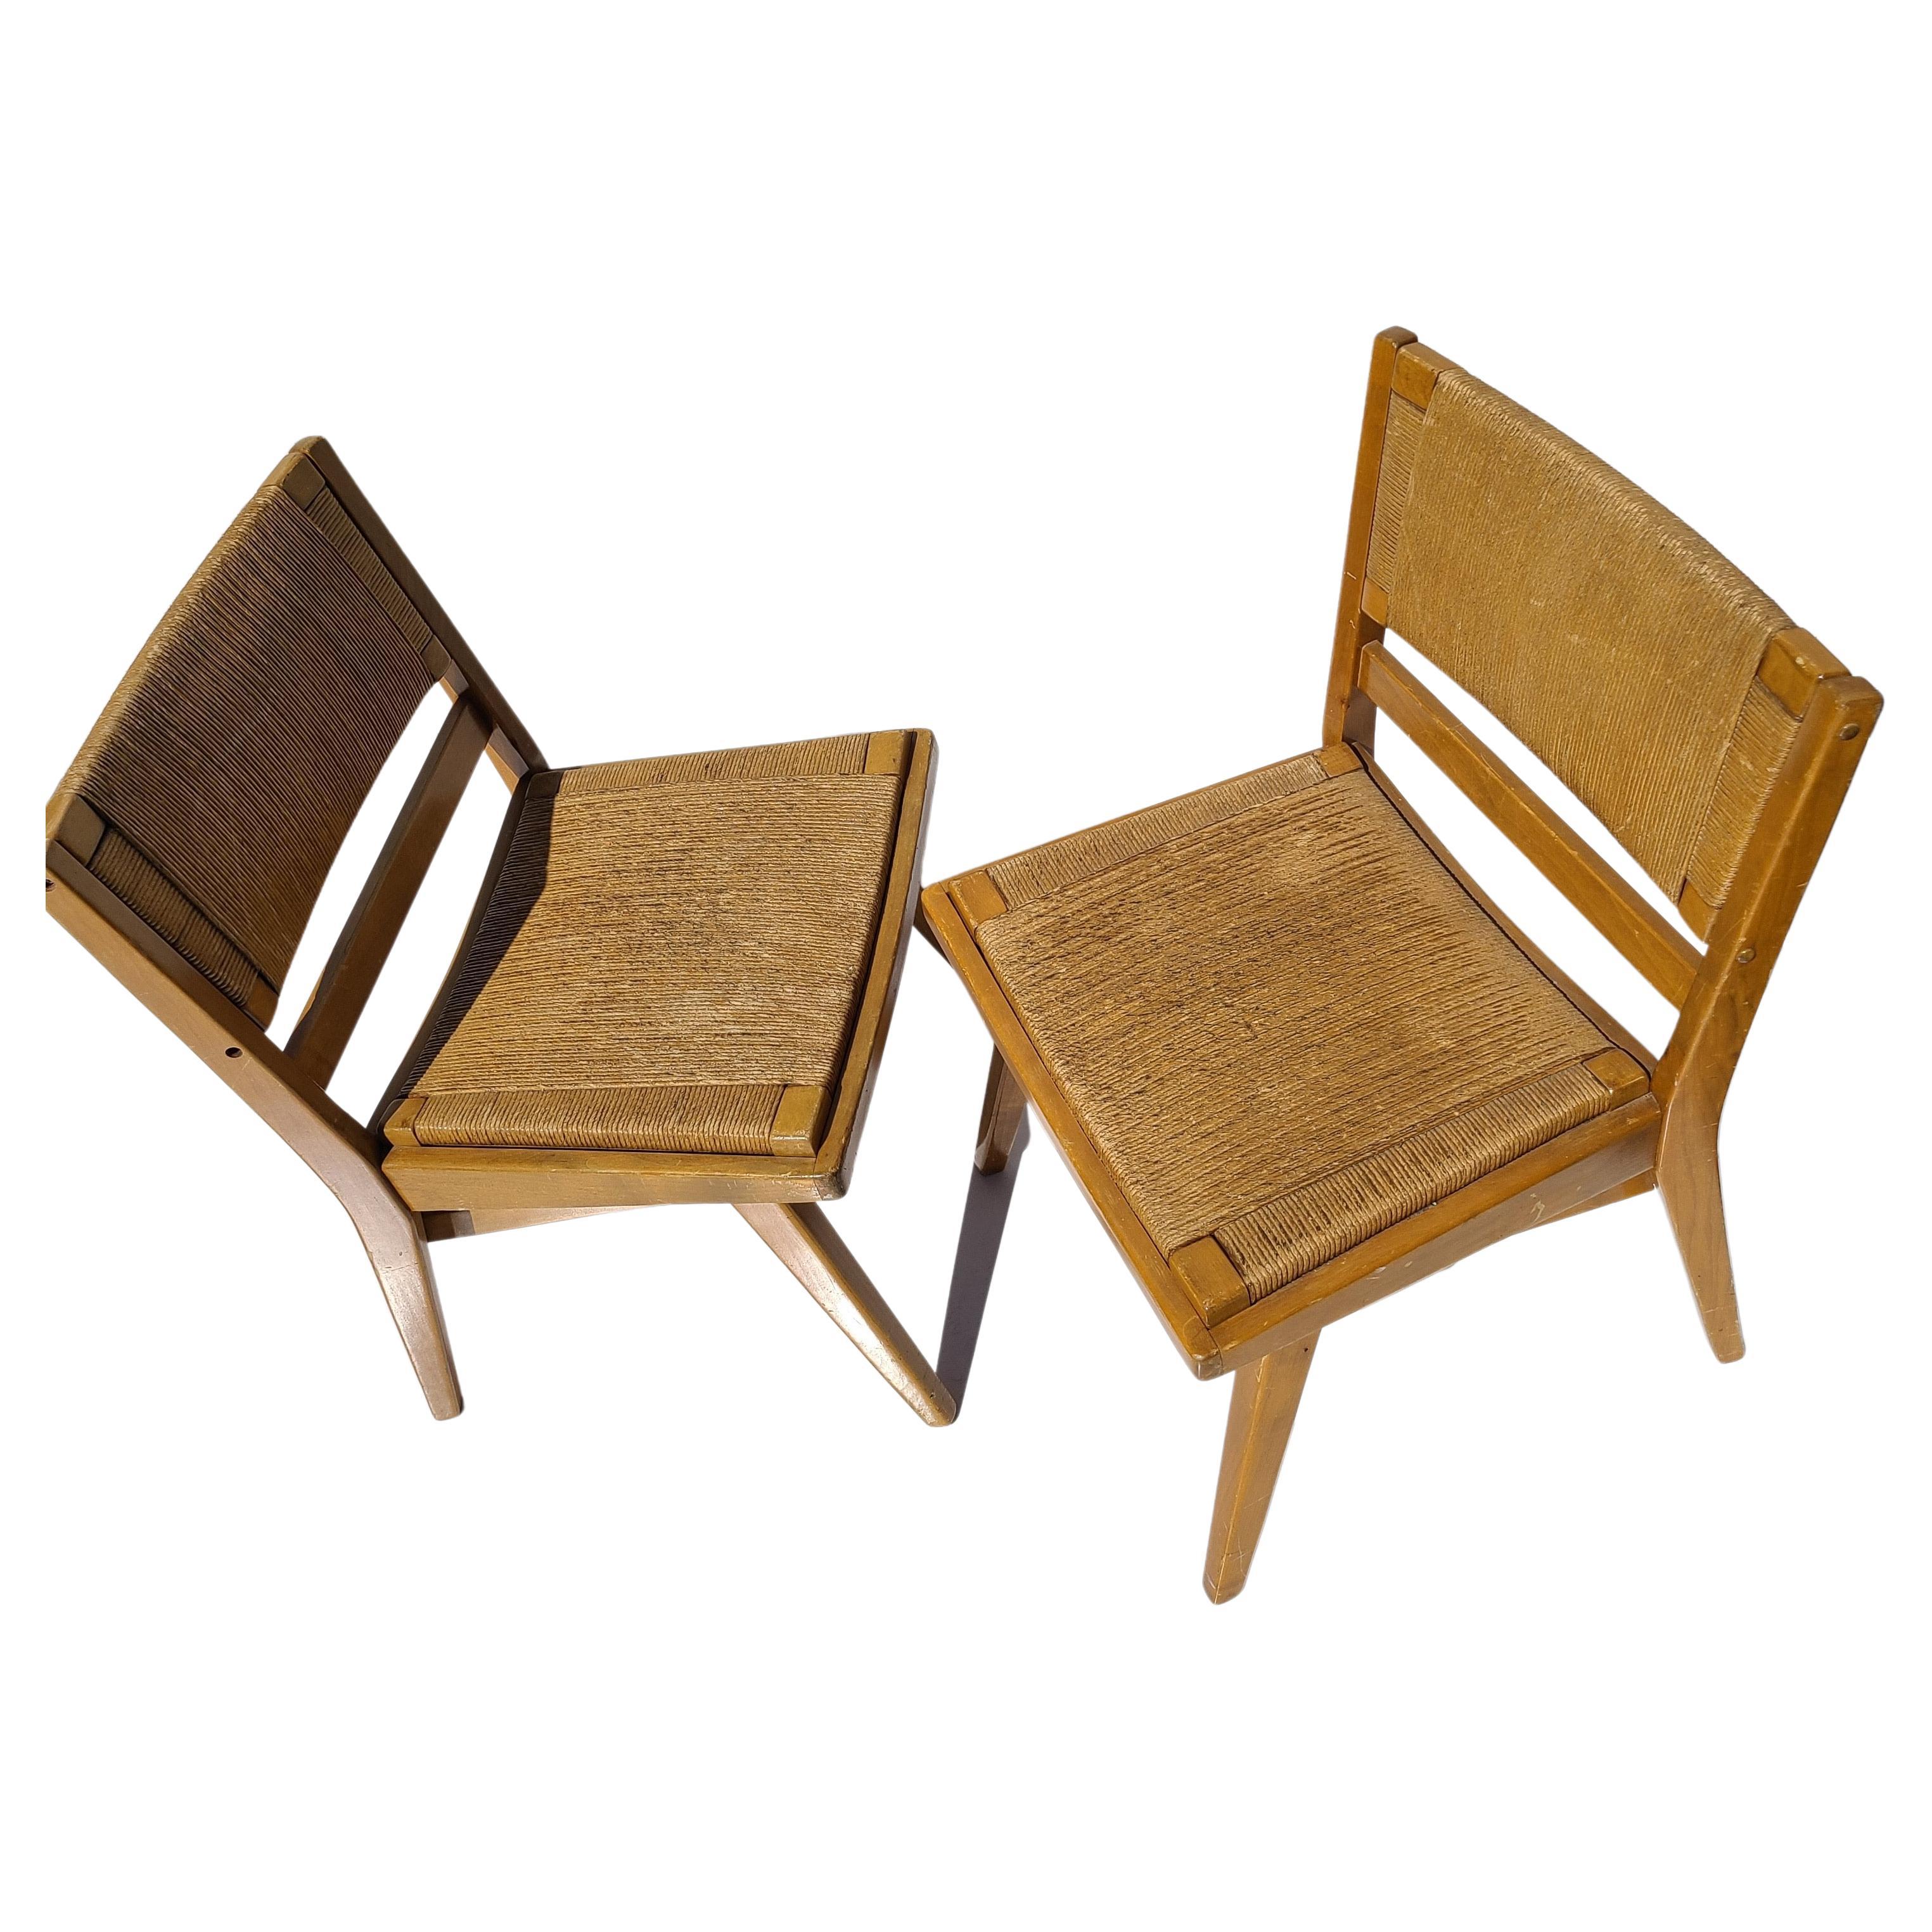 Pair Walnut Tacoma Chairs by Warner Cleveland 1